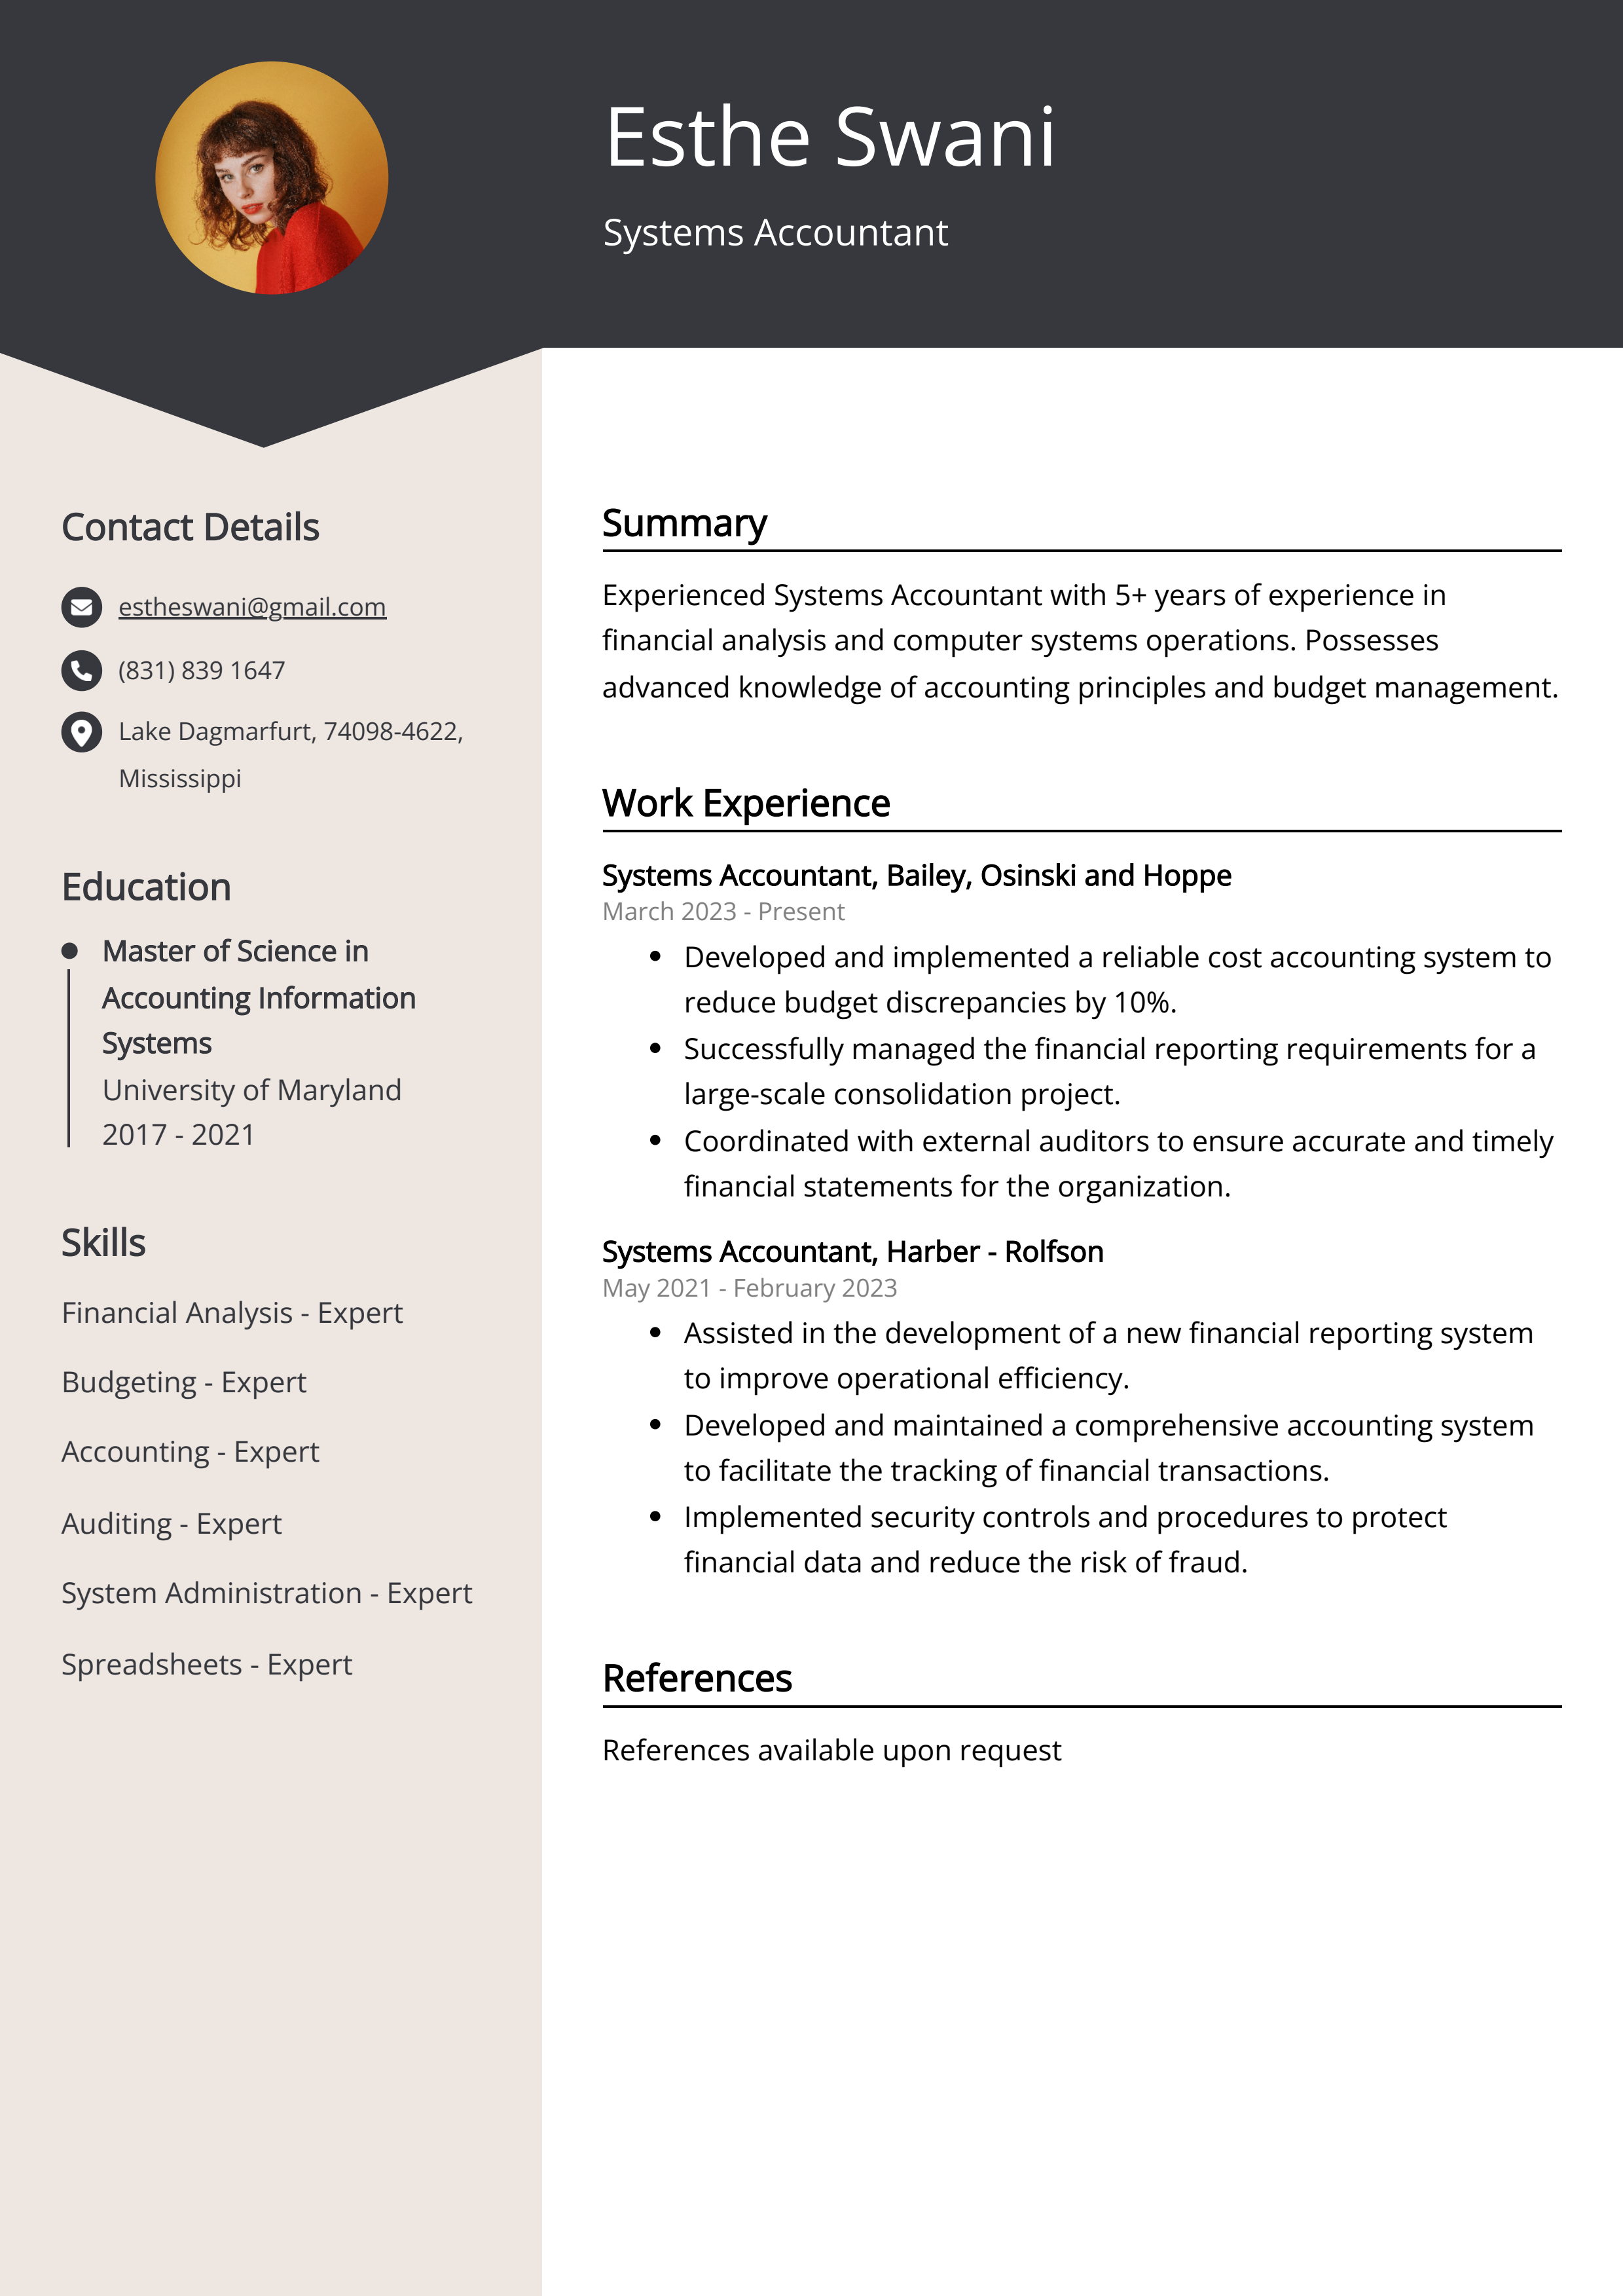 Systems Accountant CV Example